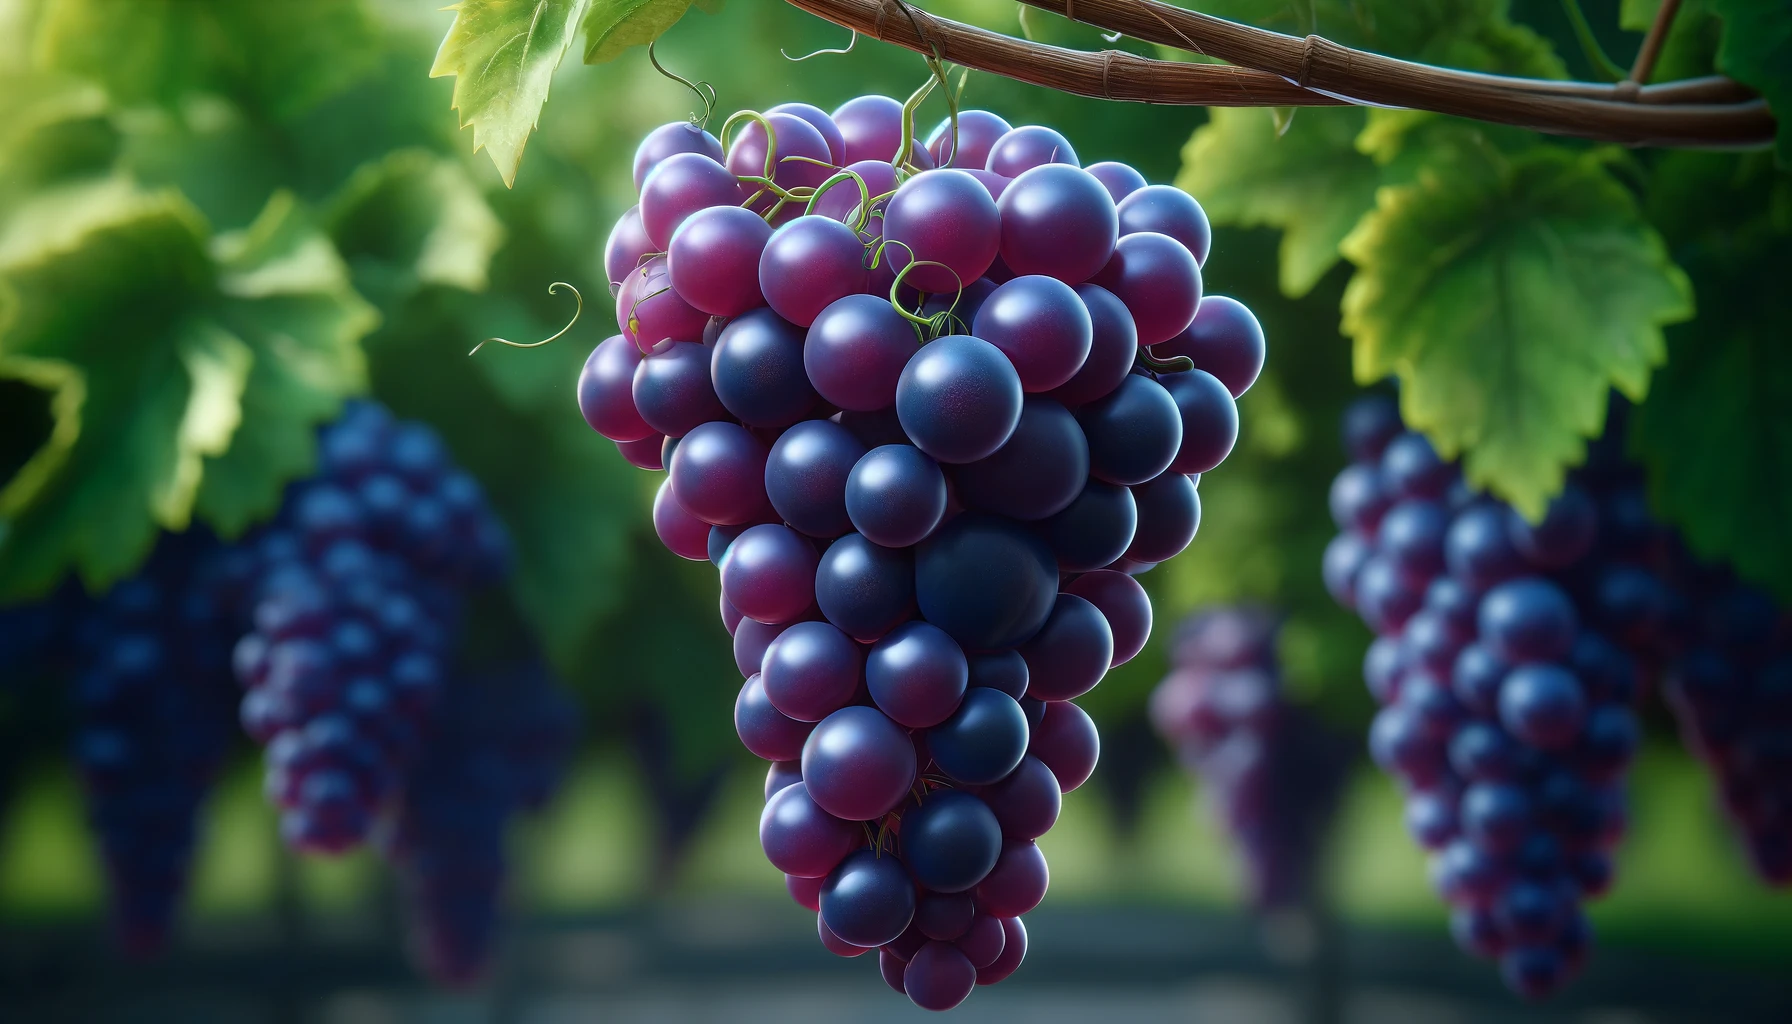 DALL·E 2024-05-23 10.59.15 - Close-up, photorealistic stock image of Concord grapes, focusing on a cluster of ripe Concord grapes with deep, vibrant purple skins, attached to the